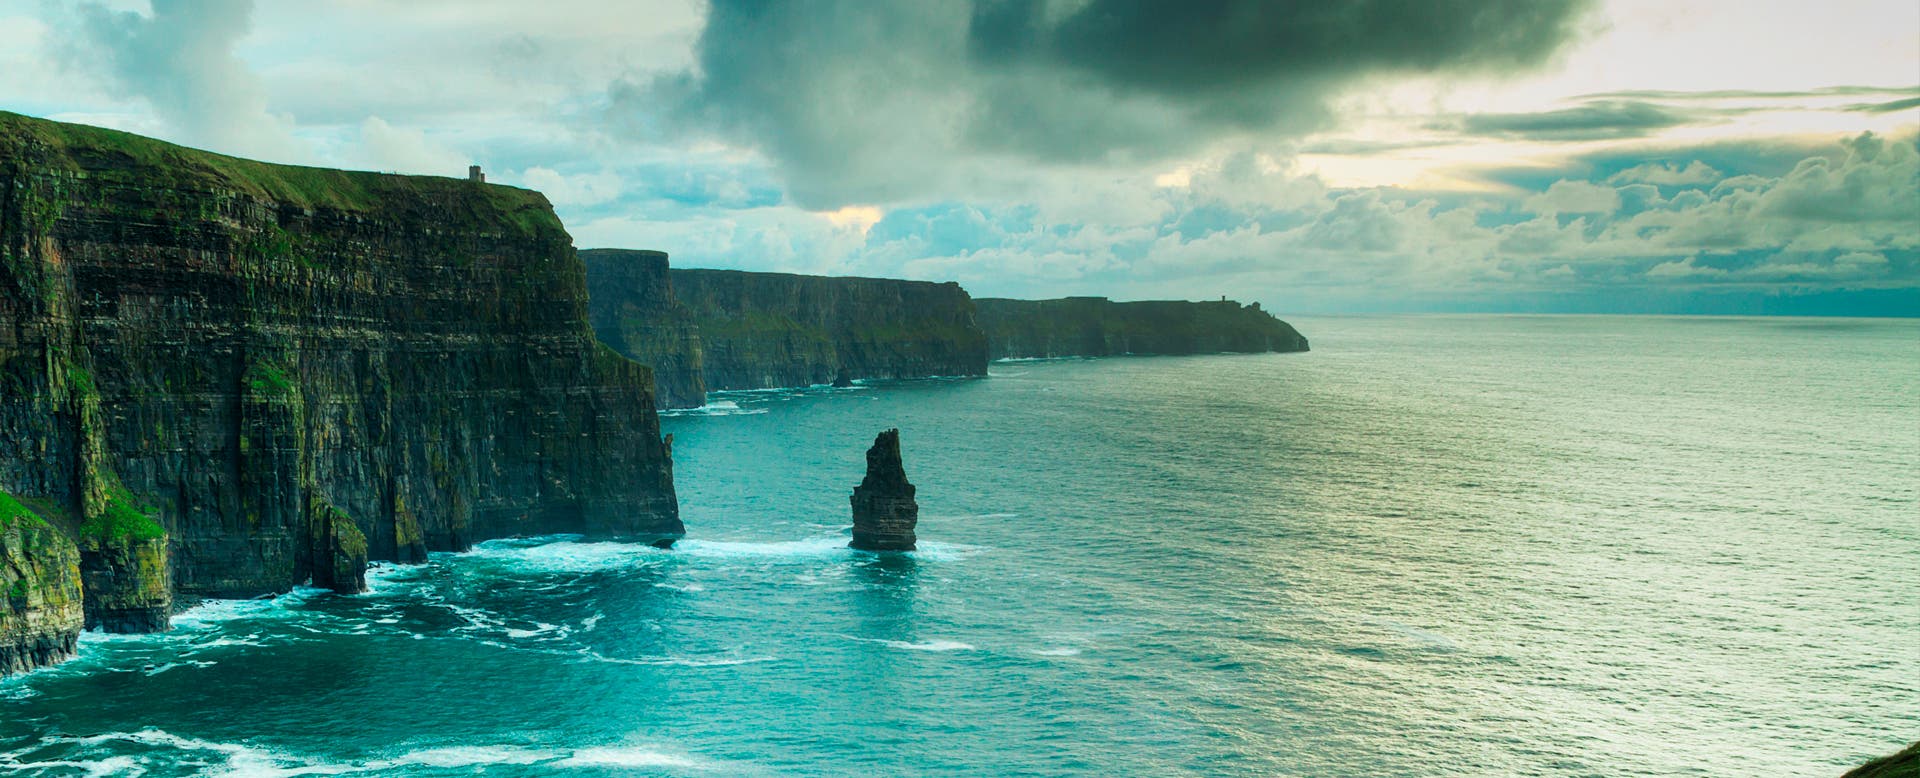 What to see in Irlande Falaises de Moher